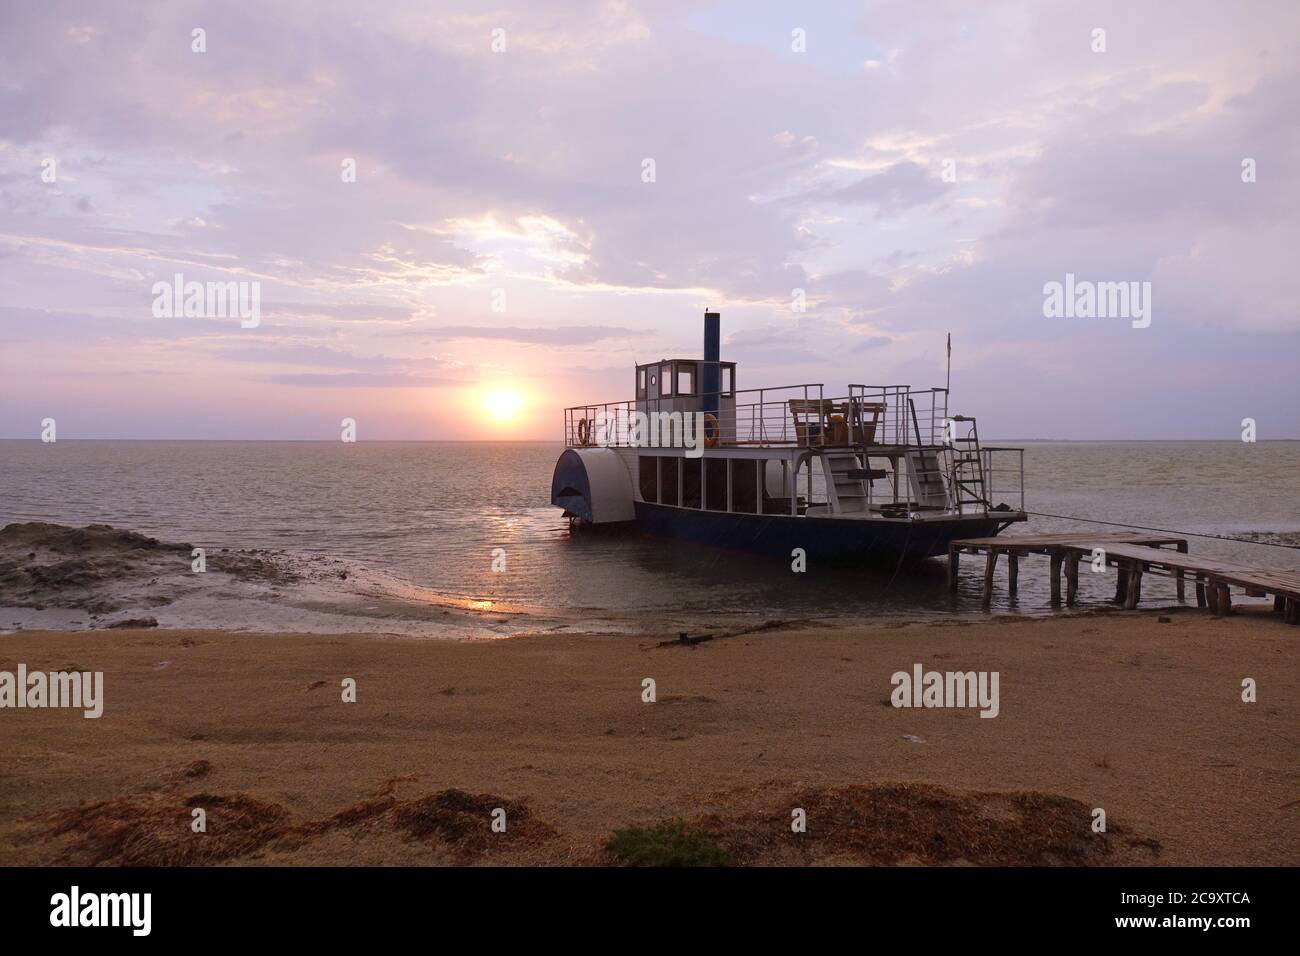 paddle wheel ship on the pier at sunset Stock Photo